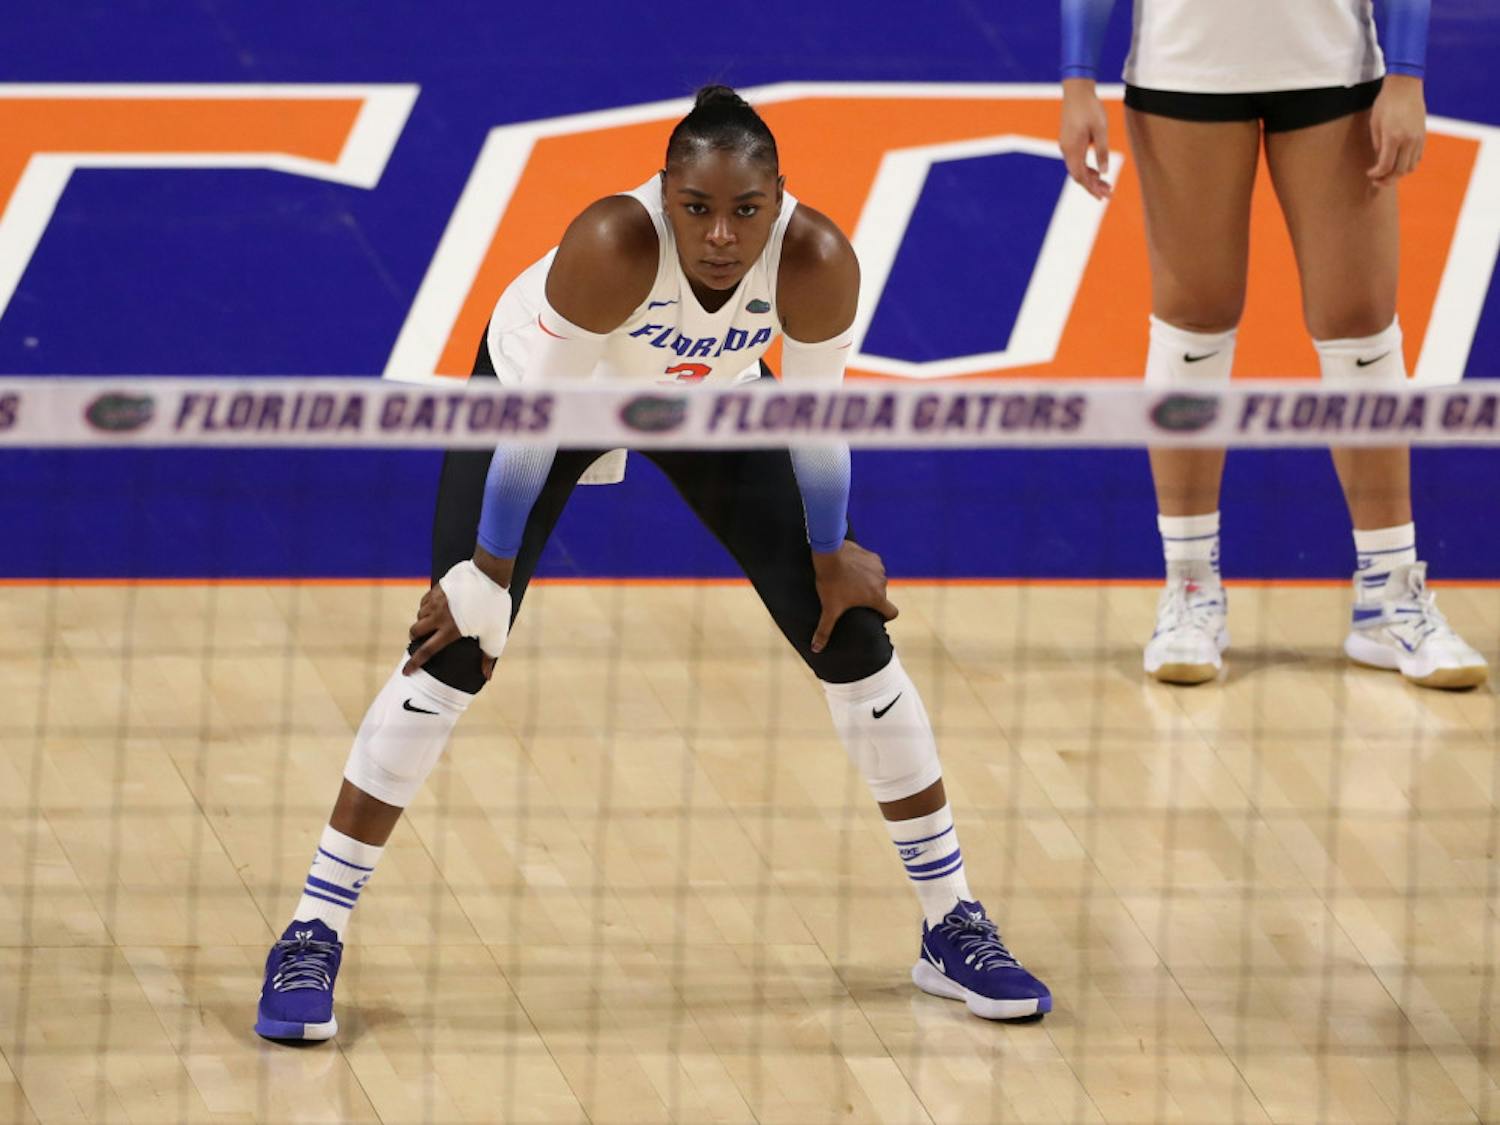 Outside hitter T'ara Ceasar during the Gators' match against the Georgia Bulldogs on Friday, November 20, 2020 at Exactech Arena at the Stephen C. O'Connell Center in Gainesville, Florida.